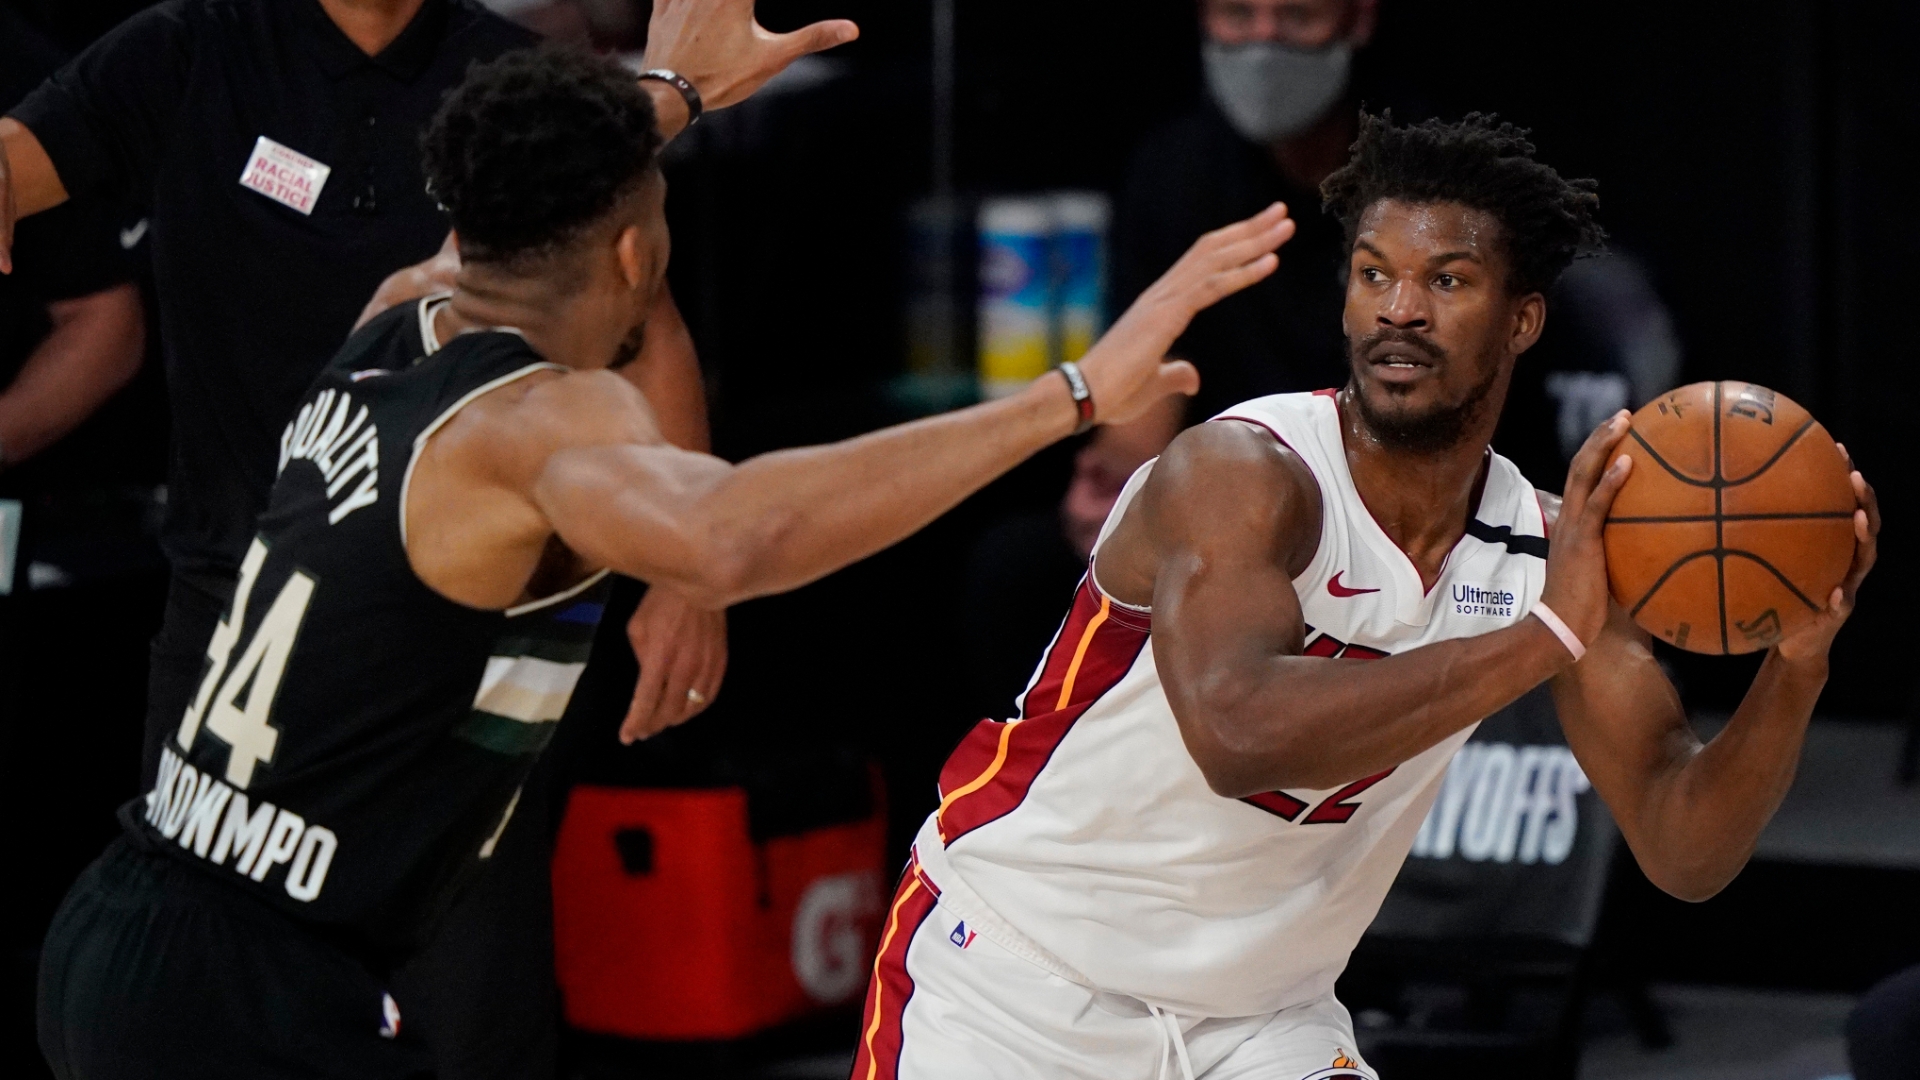 Detail excerpt: Why Jimmy Butler is so dangerous on the court